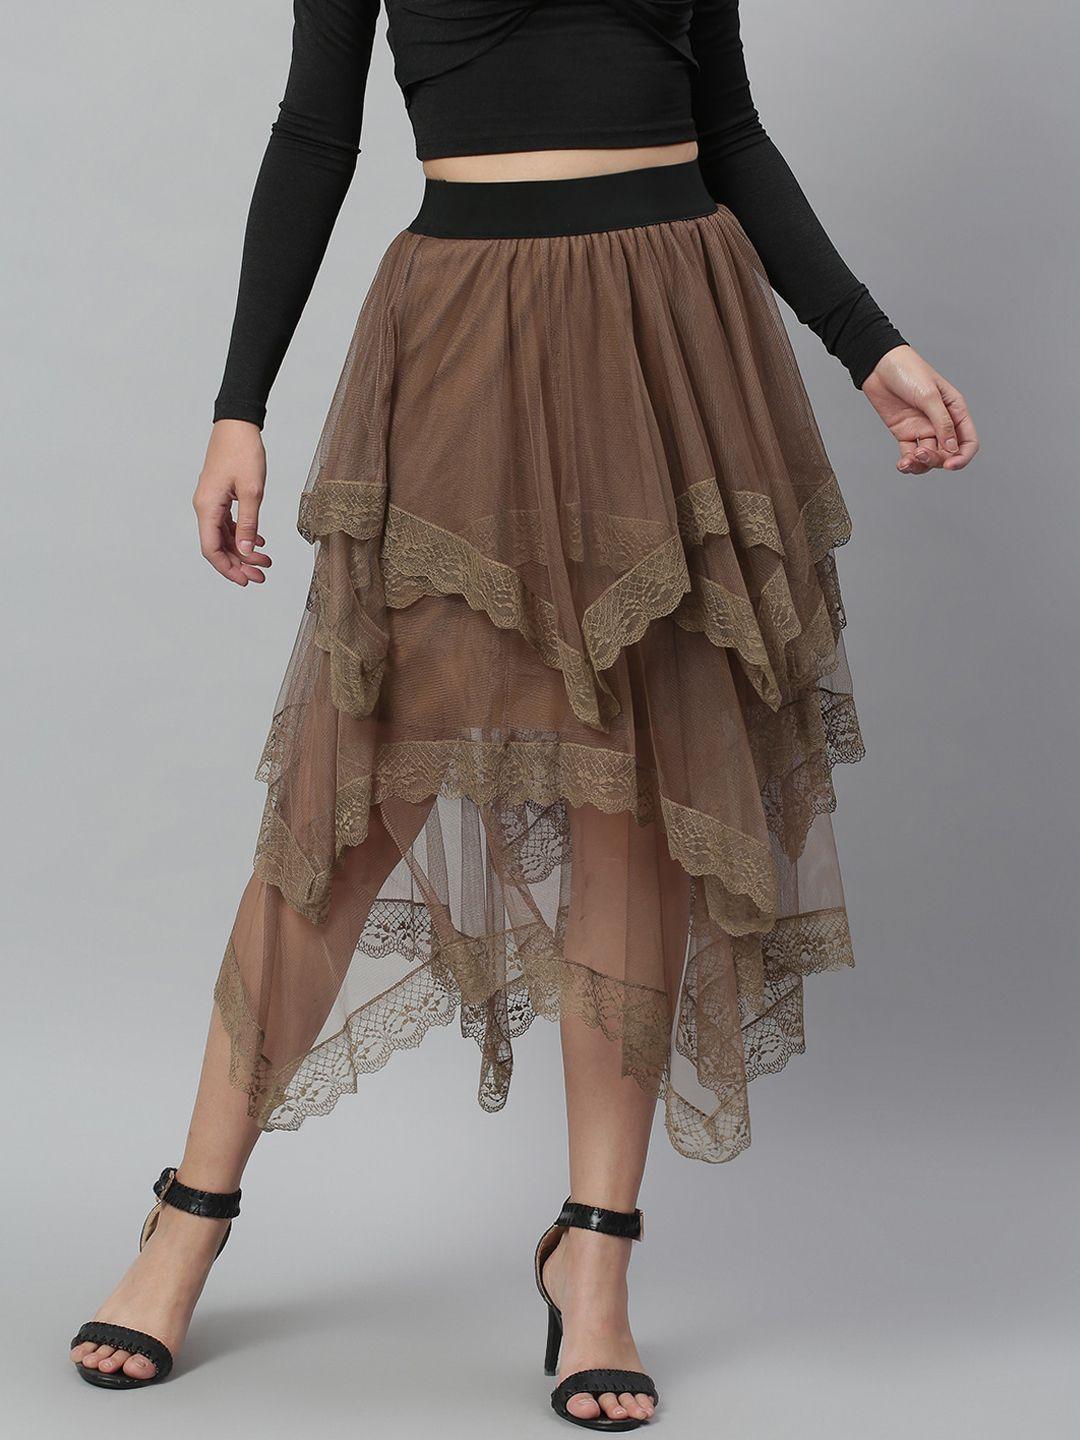 kassually women brown solid layered lace sheer skirt